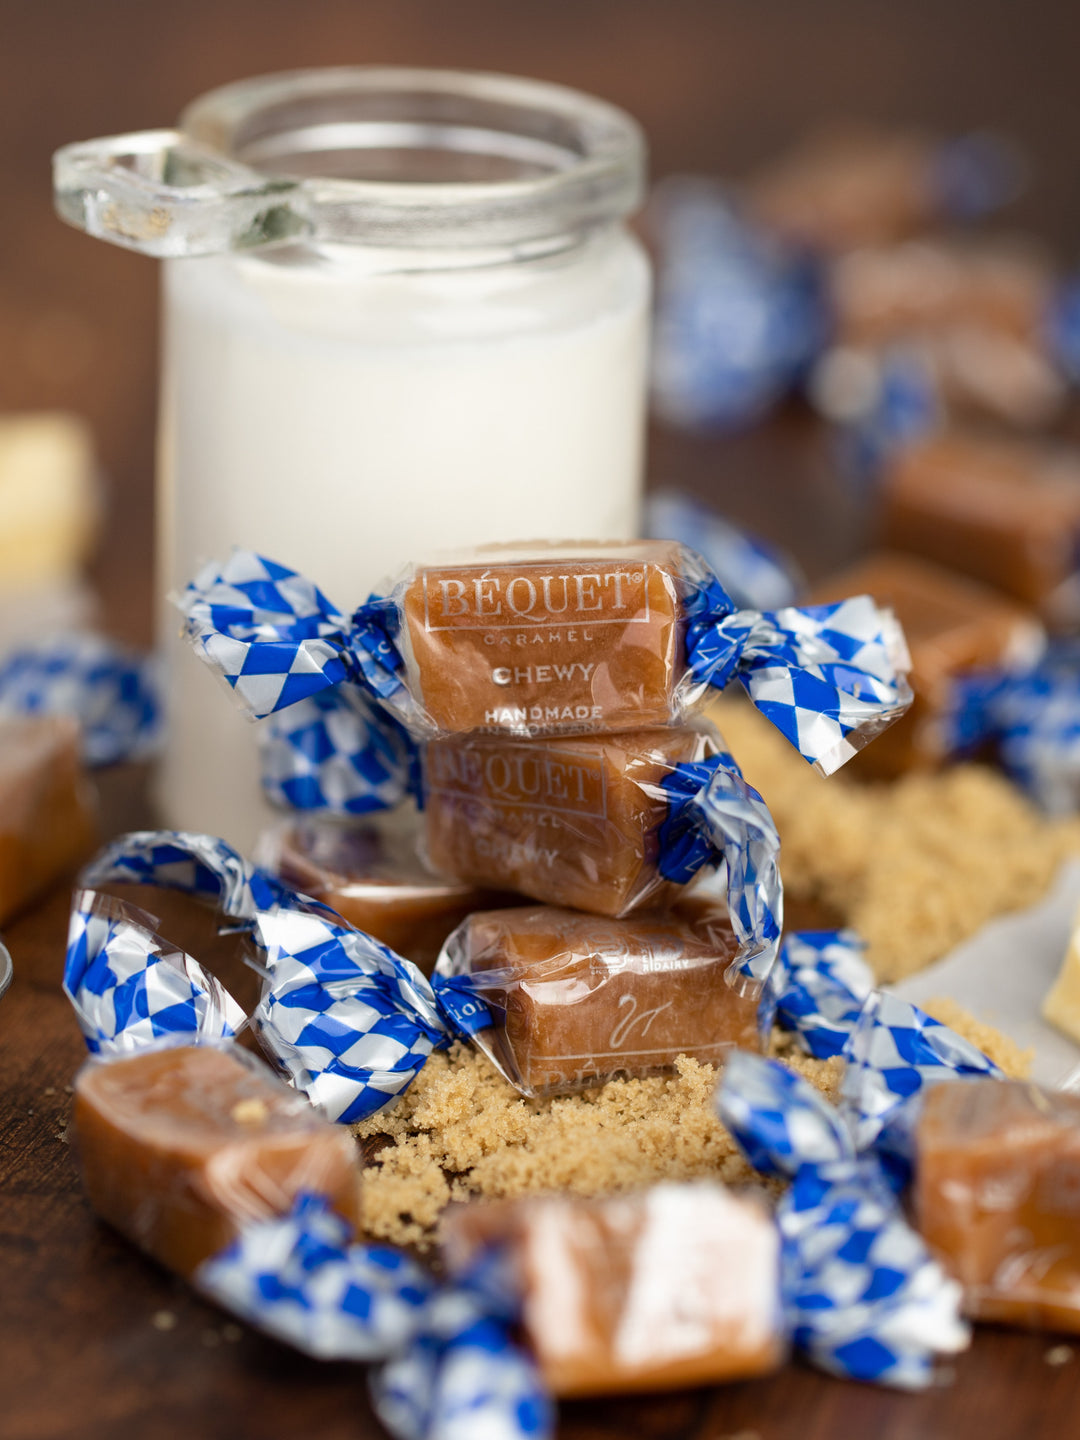 chewy bequet caramel#caramel-variety_chewy